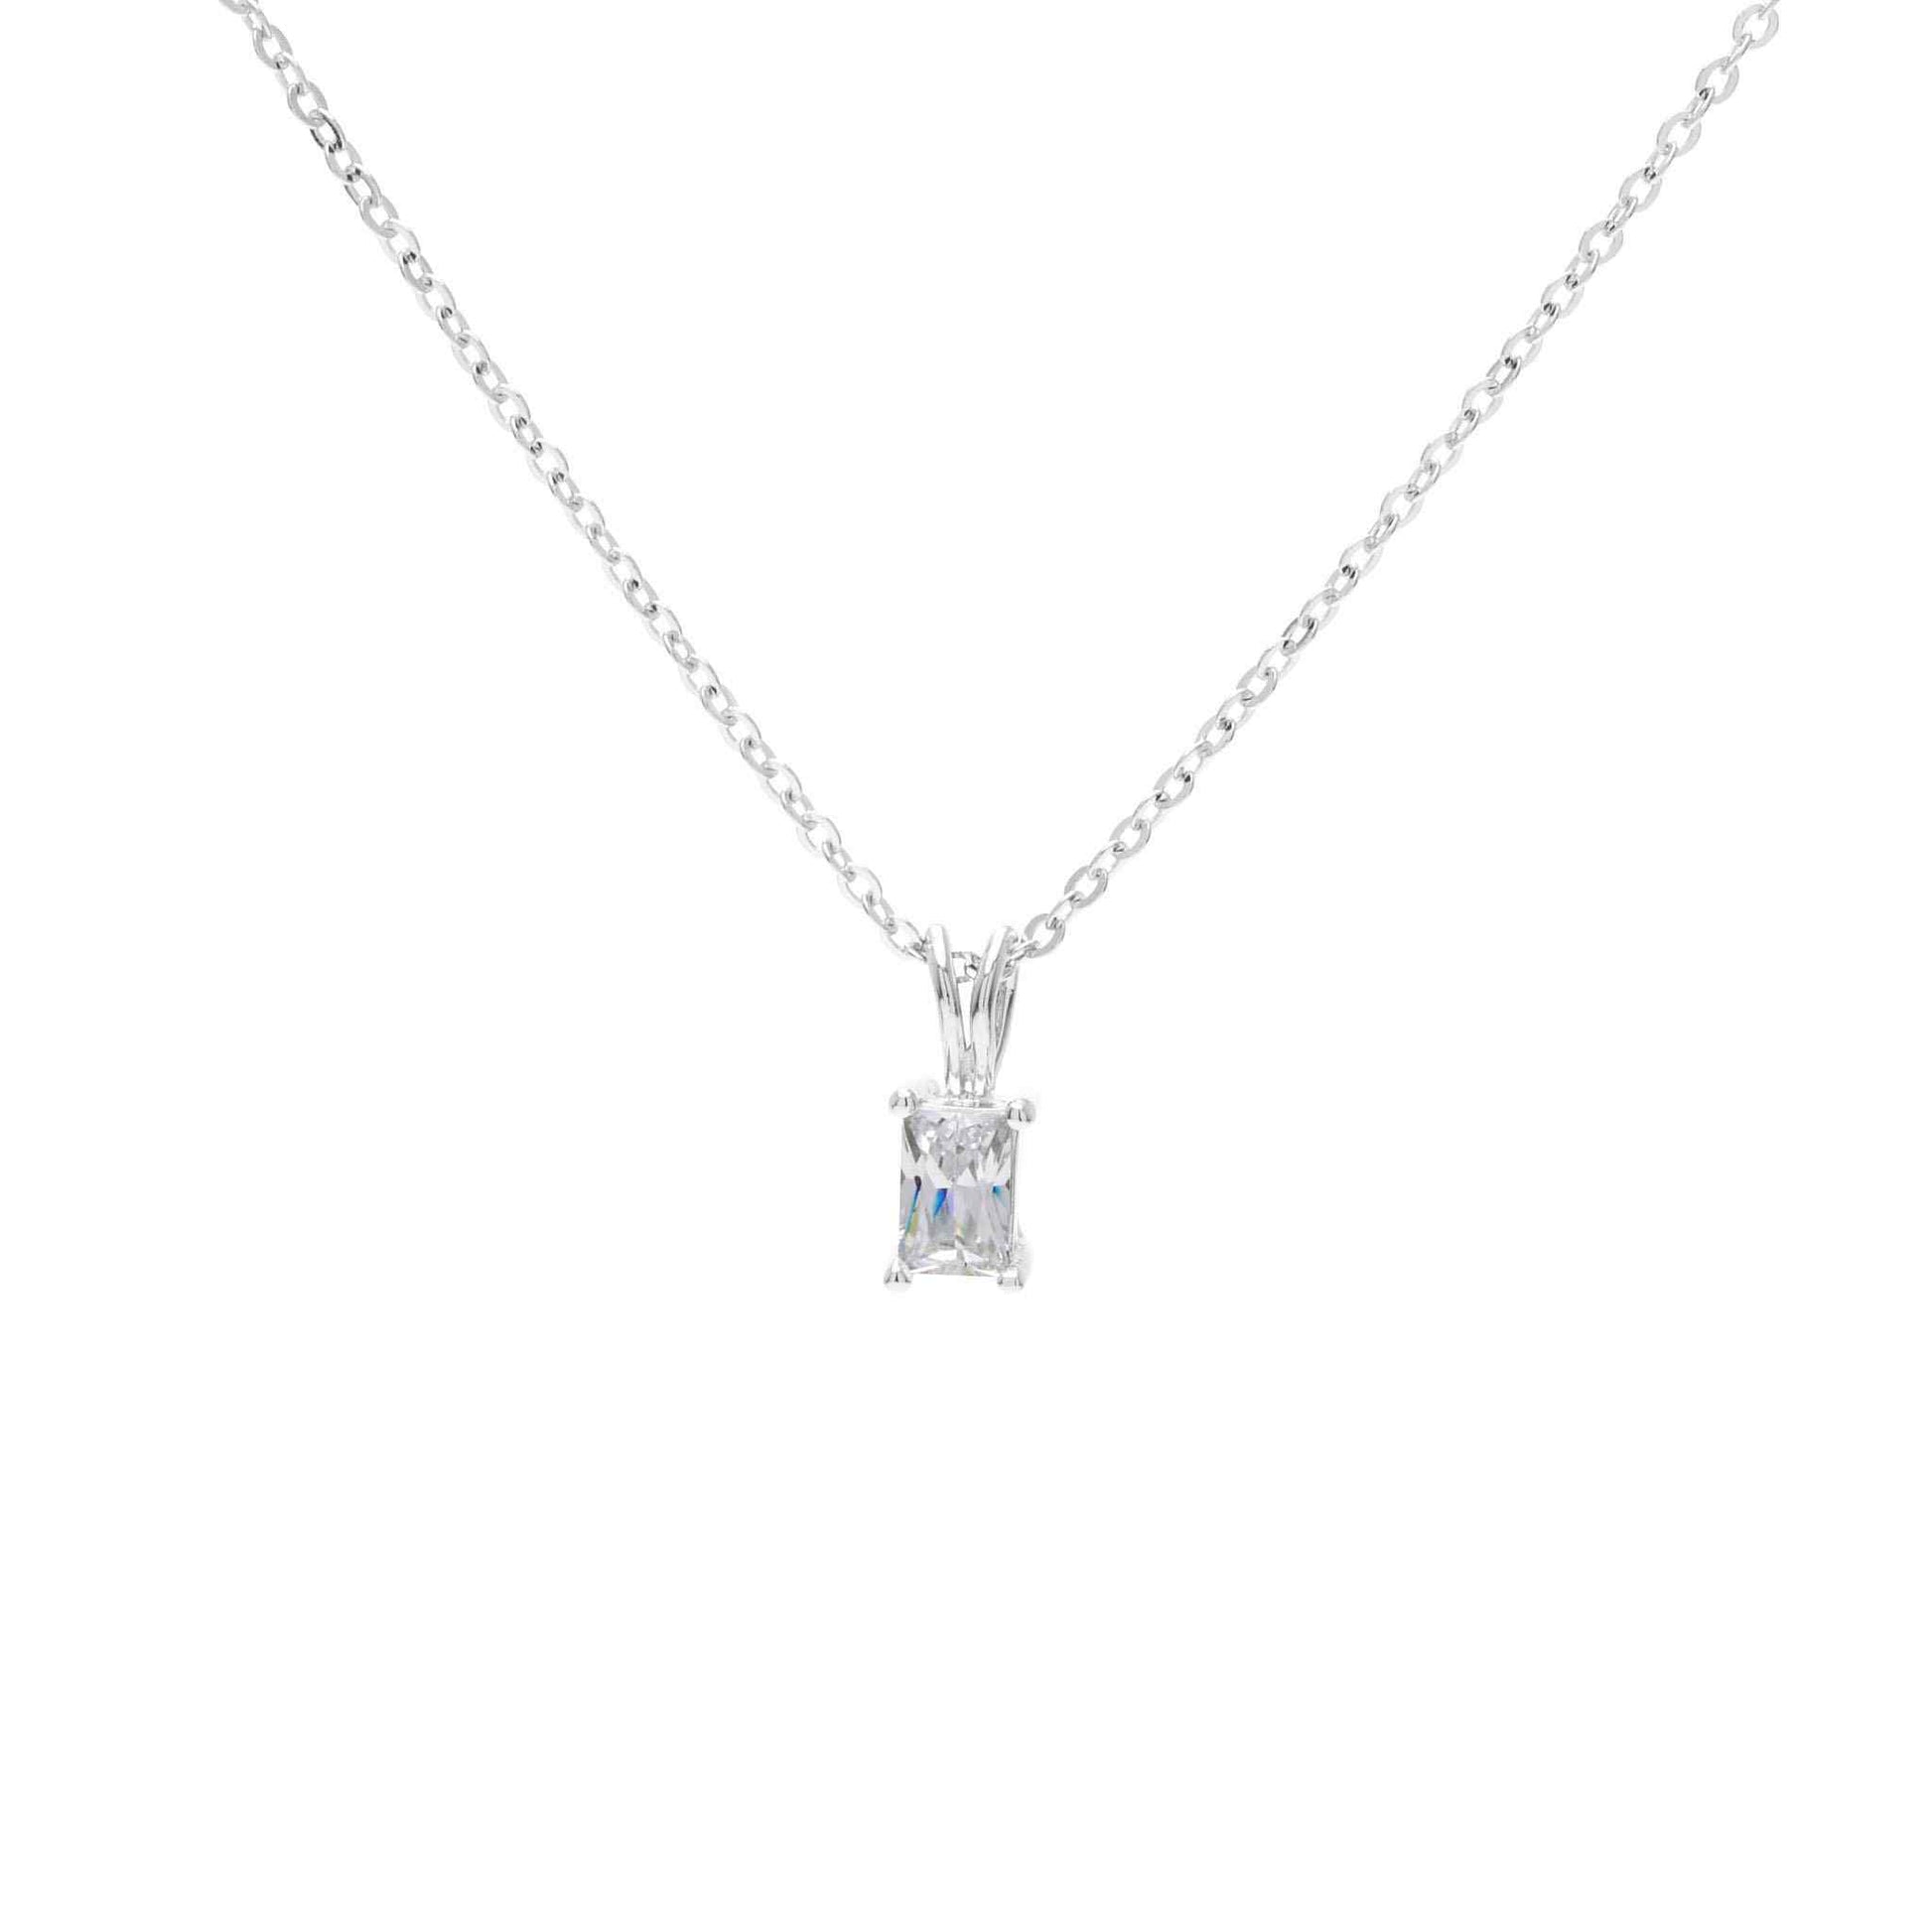 A emerald cut simulated diamond necklace displayed on a neutral white background.